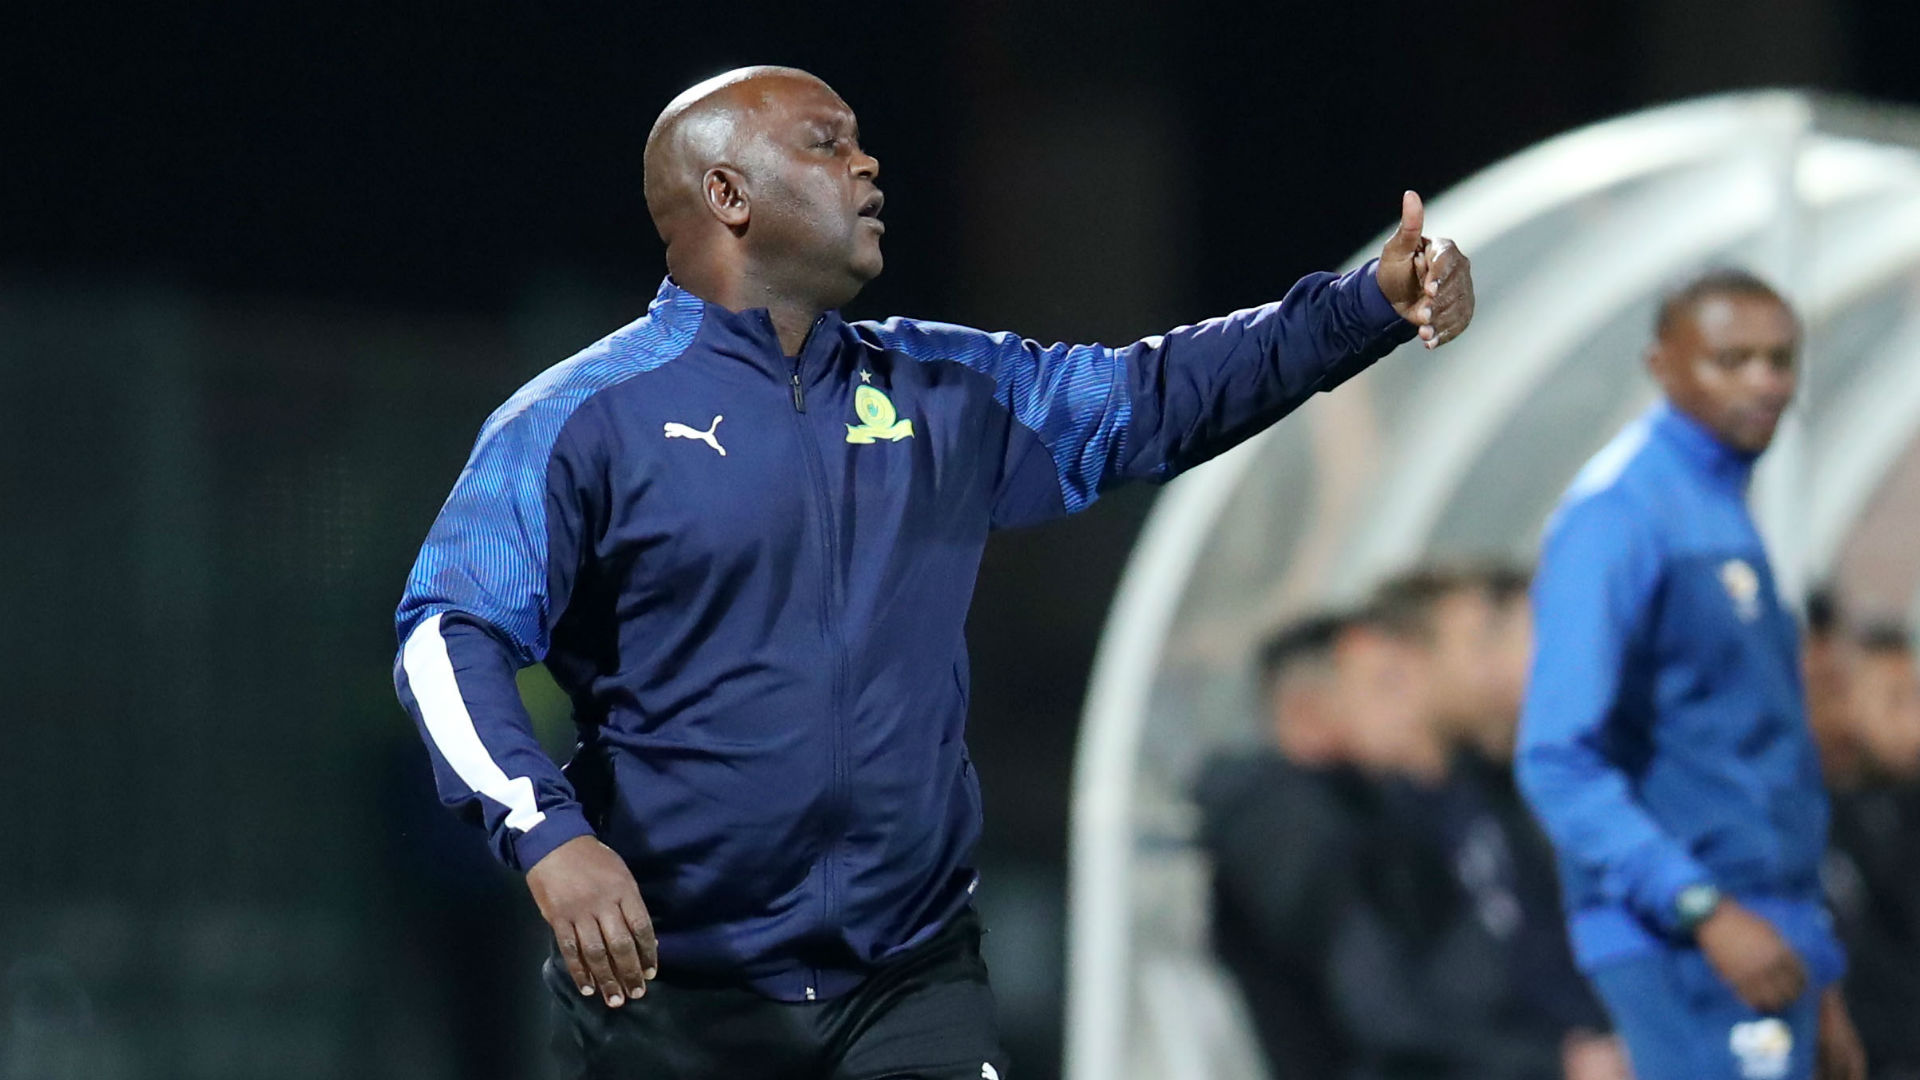 'Mamelodi Sundowns players won't listen to me' - Mosimane unhappy with defence